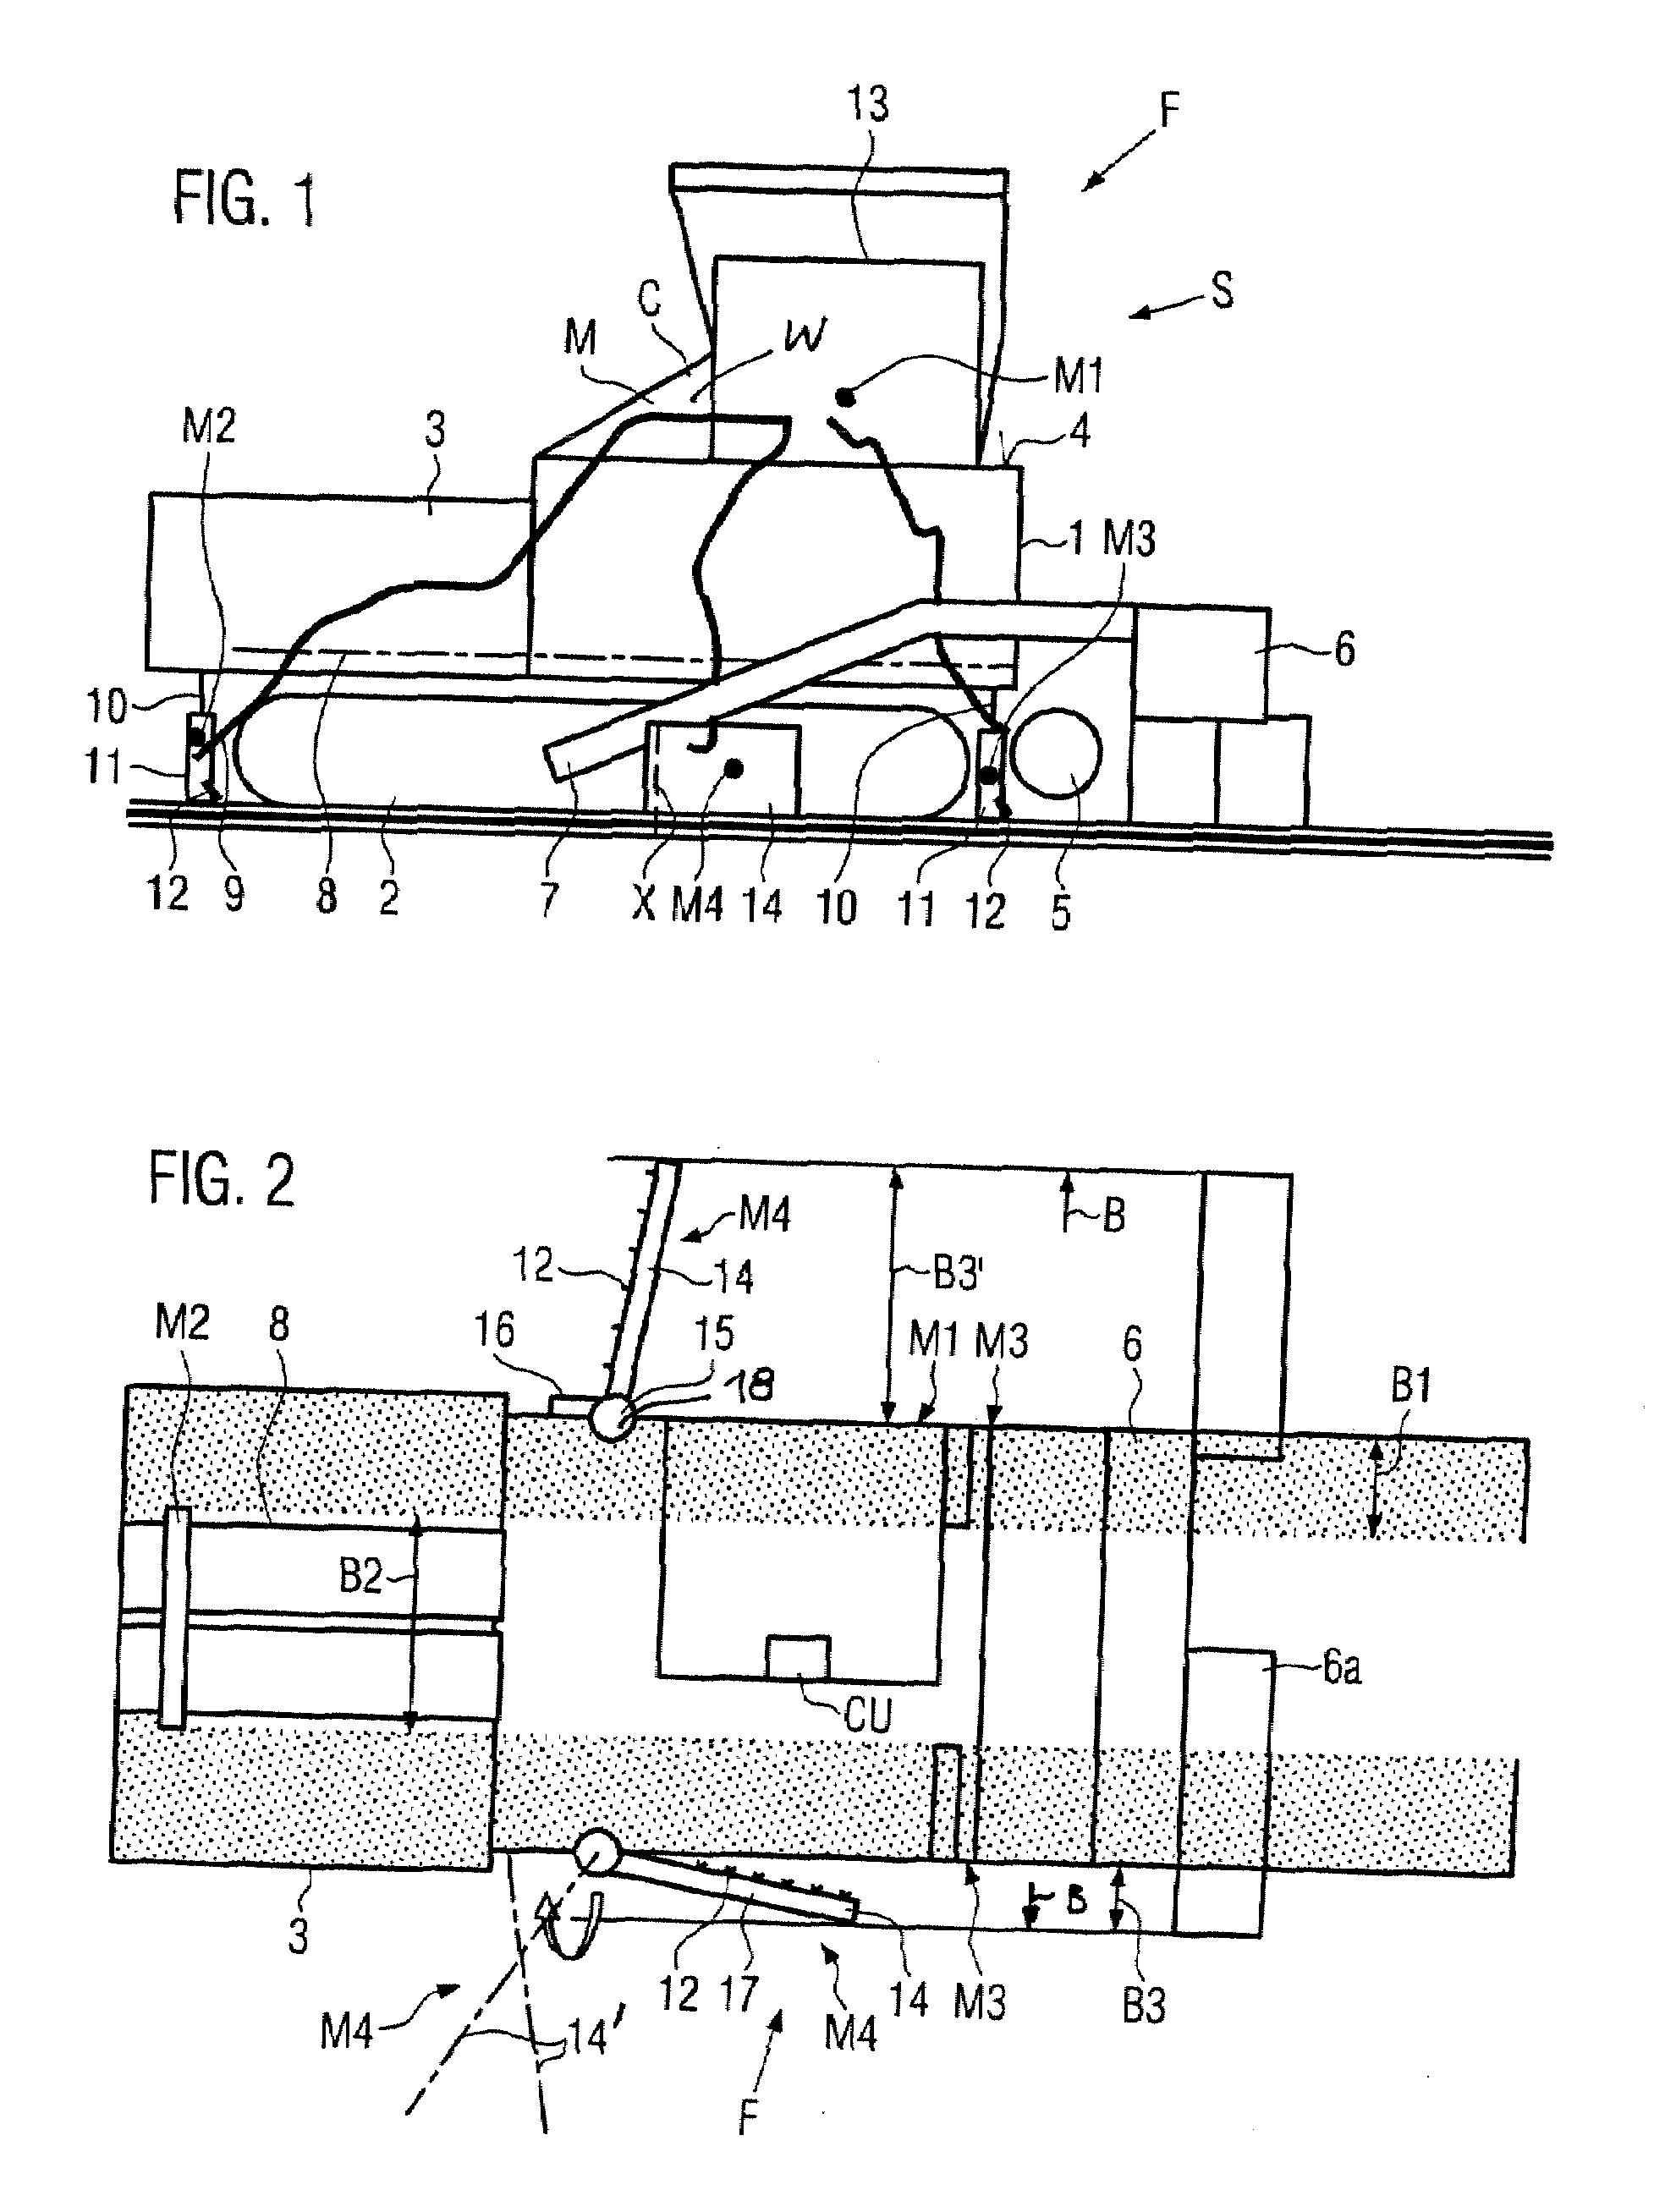 Method for producing a continuous bonding agent carpet and road finisher